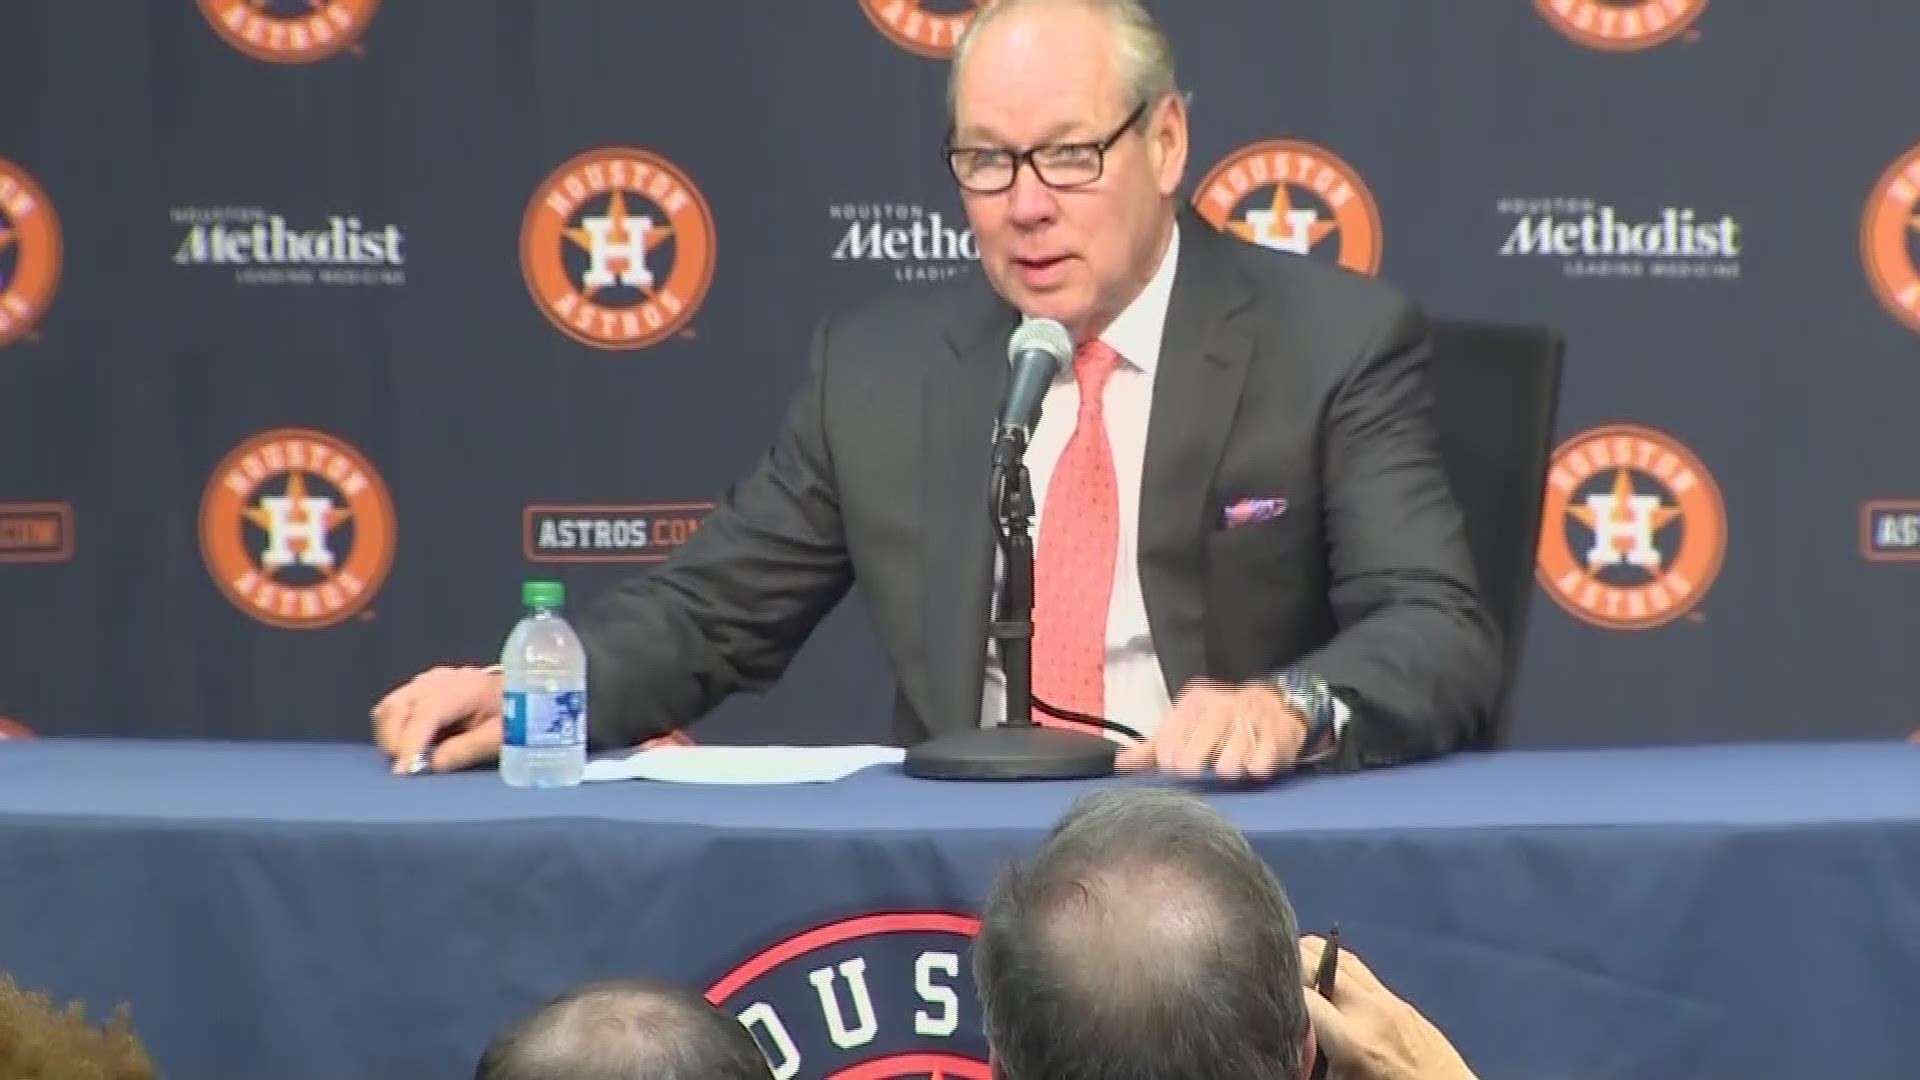 Major League Baseball came down on the Astros today, suspending Jeff Luhnow and A.J. Hinch. Team owner Jim Crane took it a step further and fired them both.